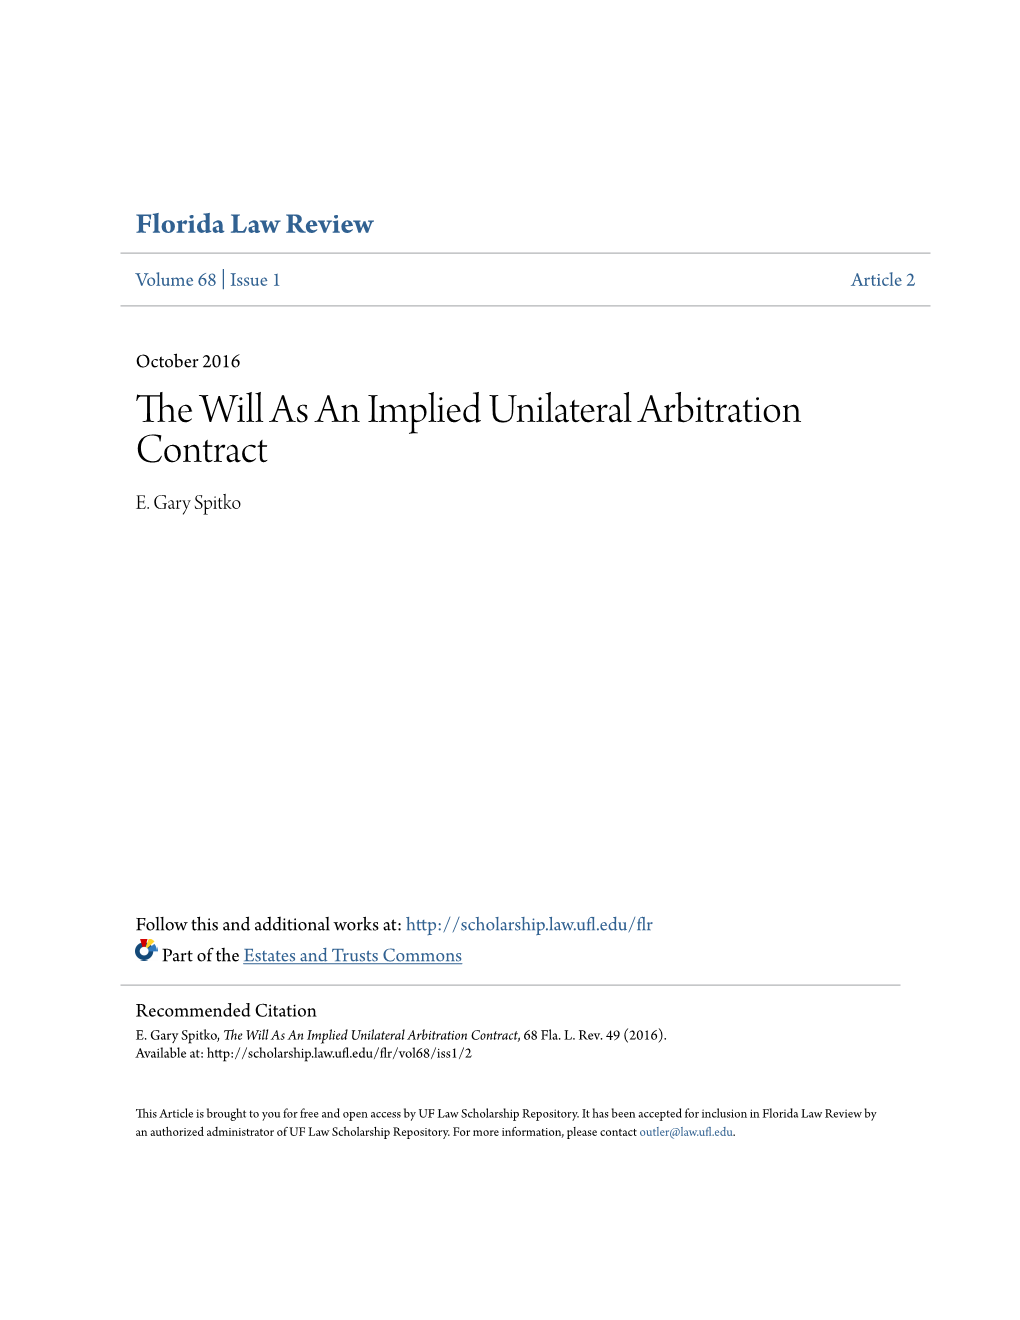 The Will As an Implied Unilateral Arbitration Contract, 68 Fla